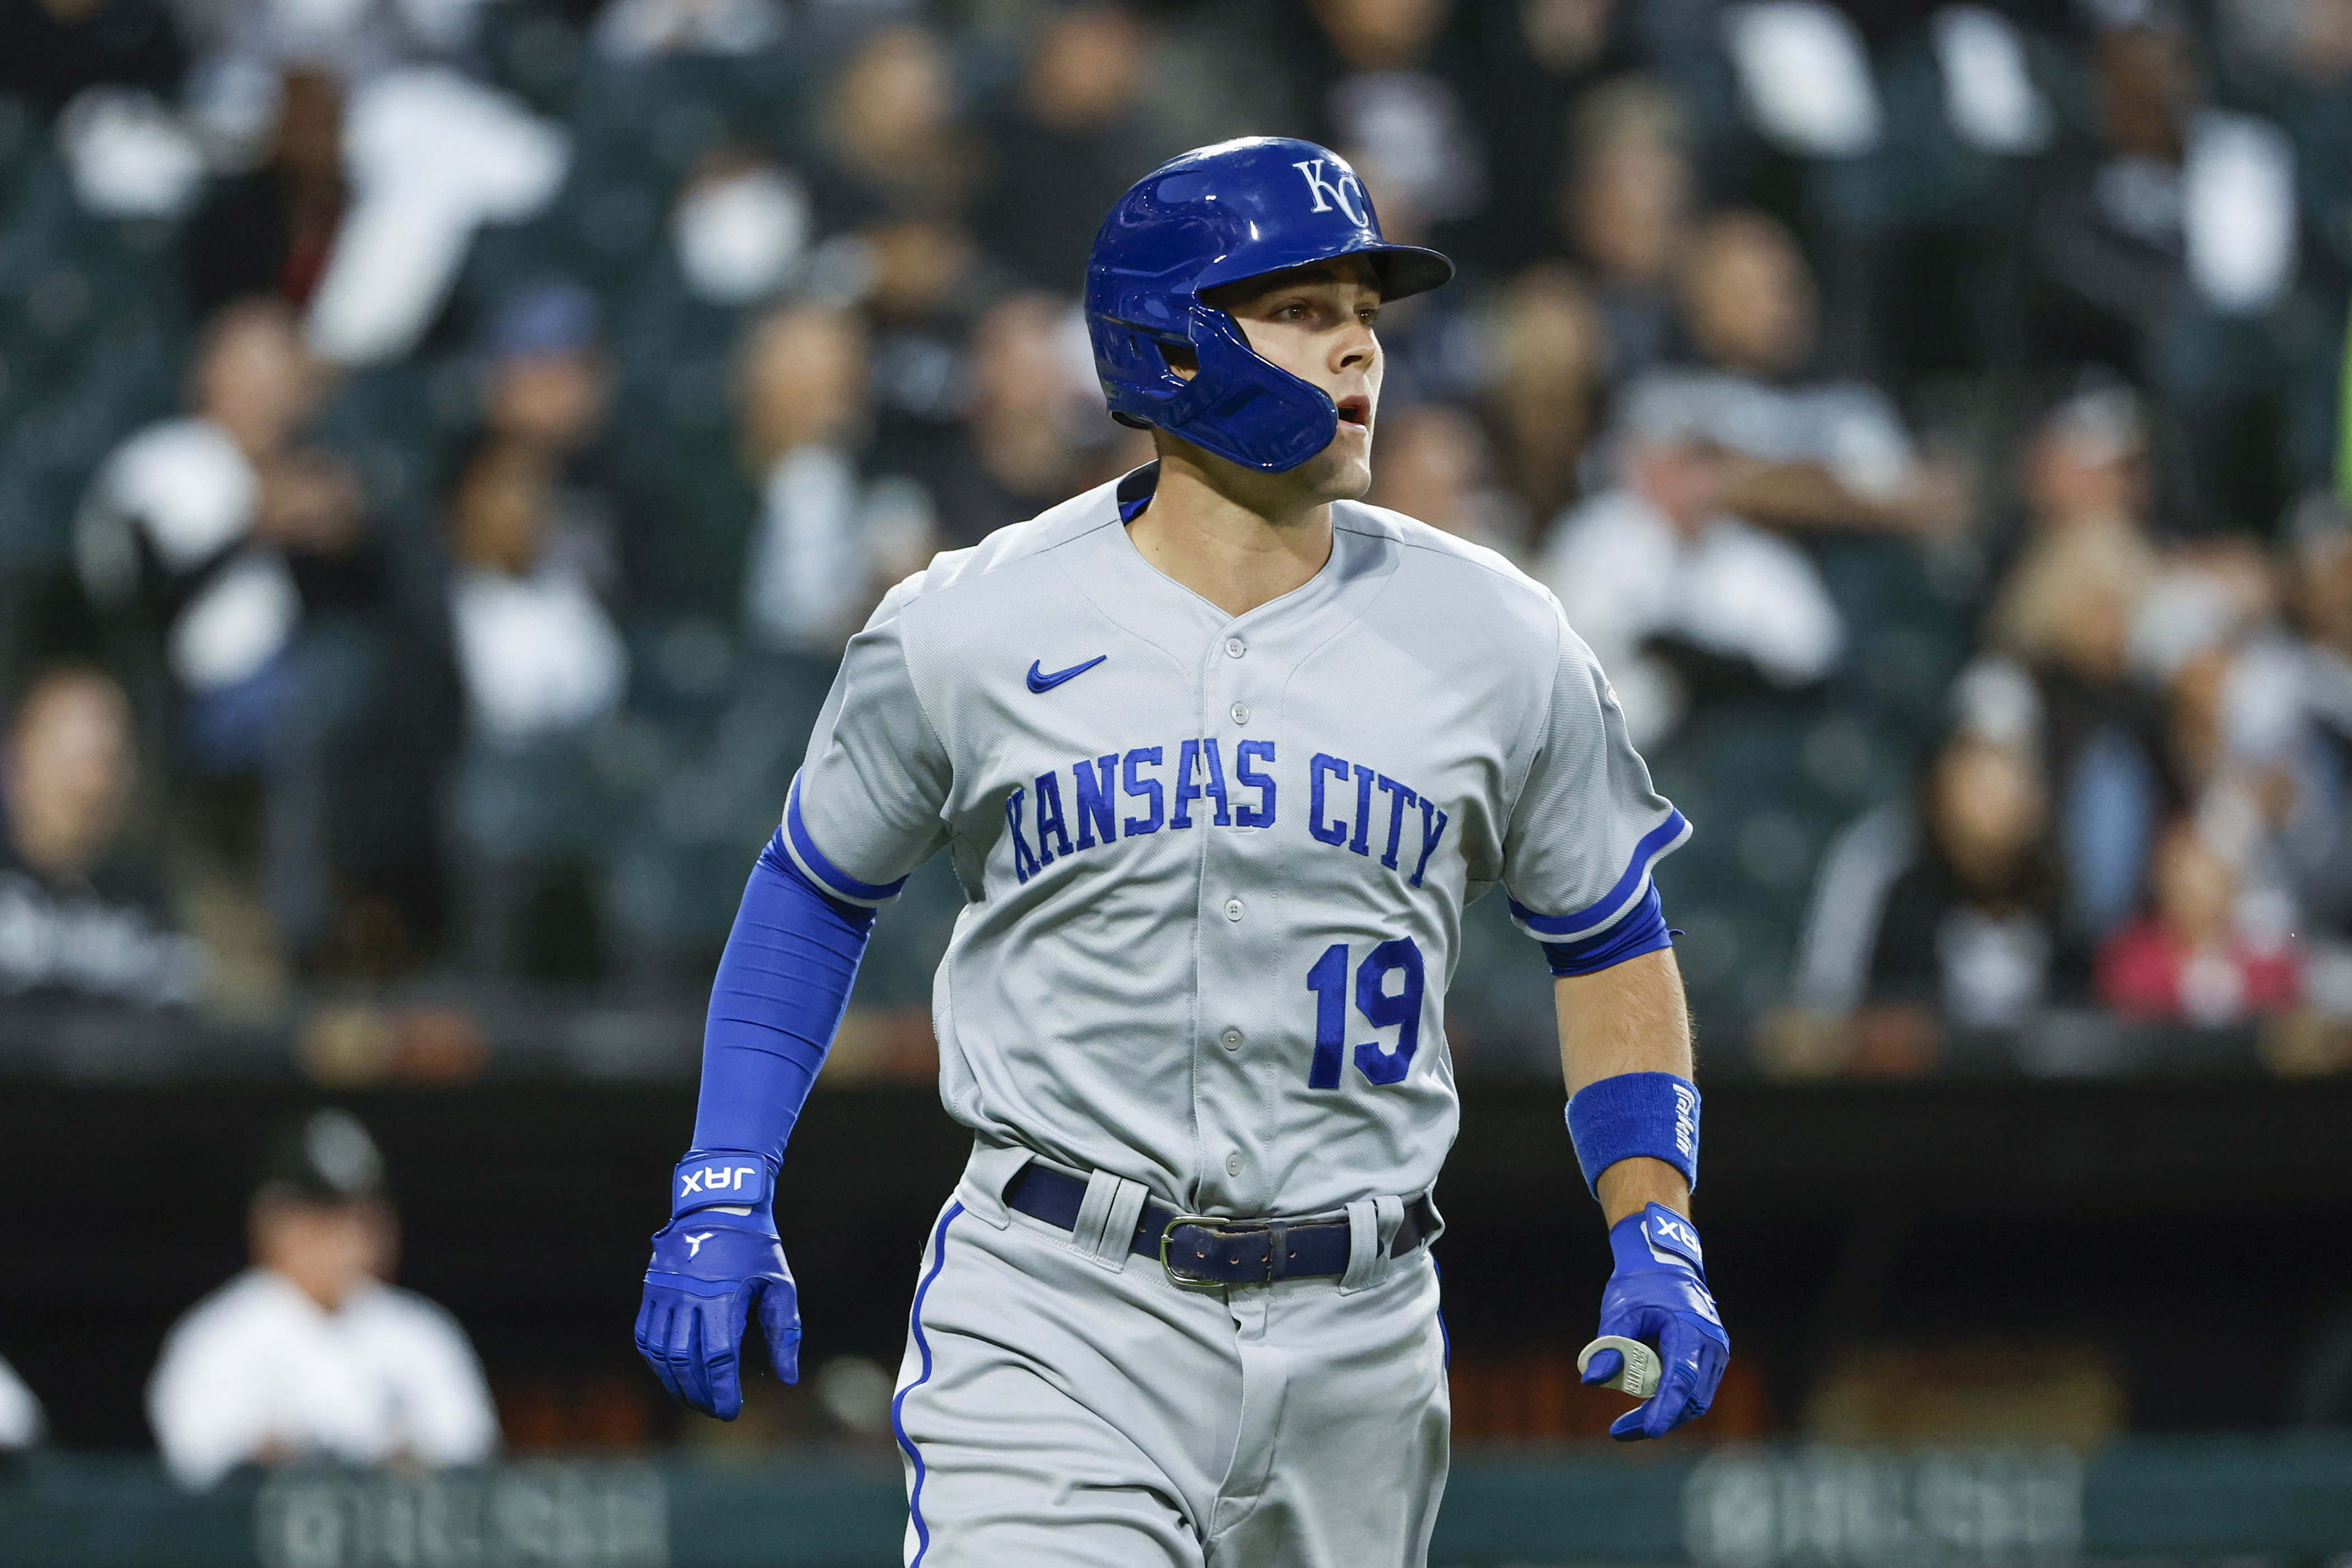 Massey hits third homer of series but Royals can't avoid being